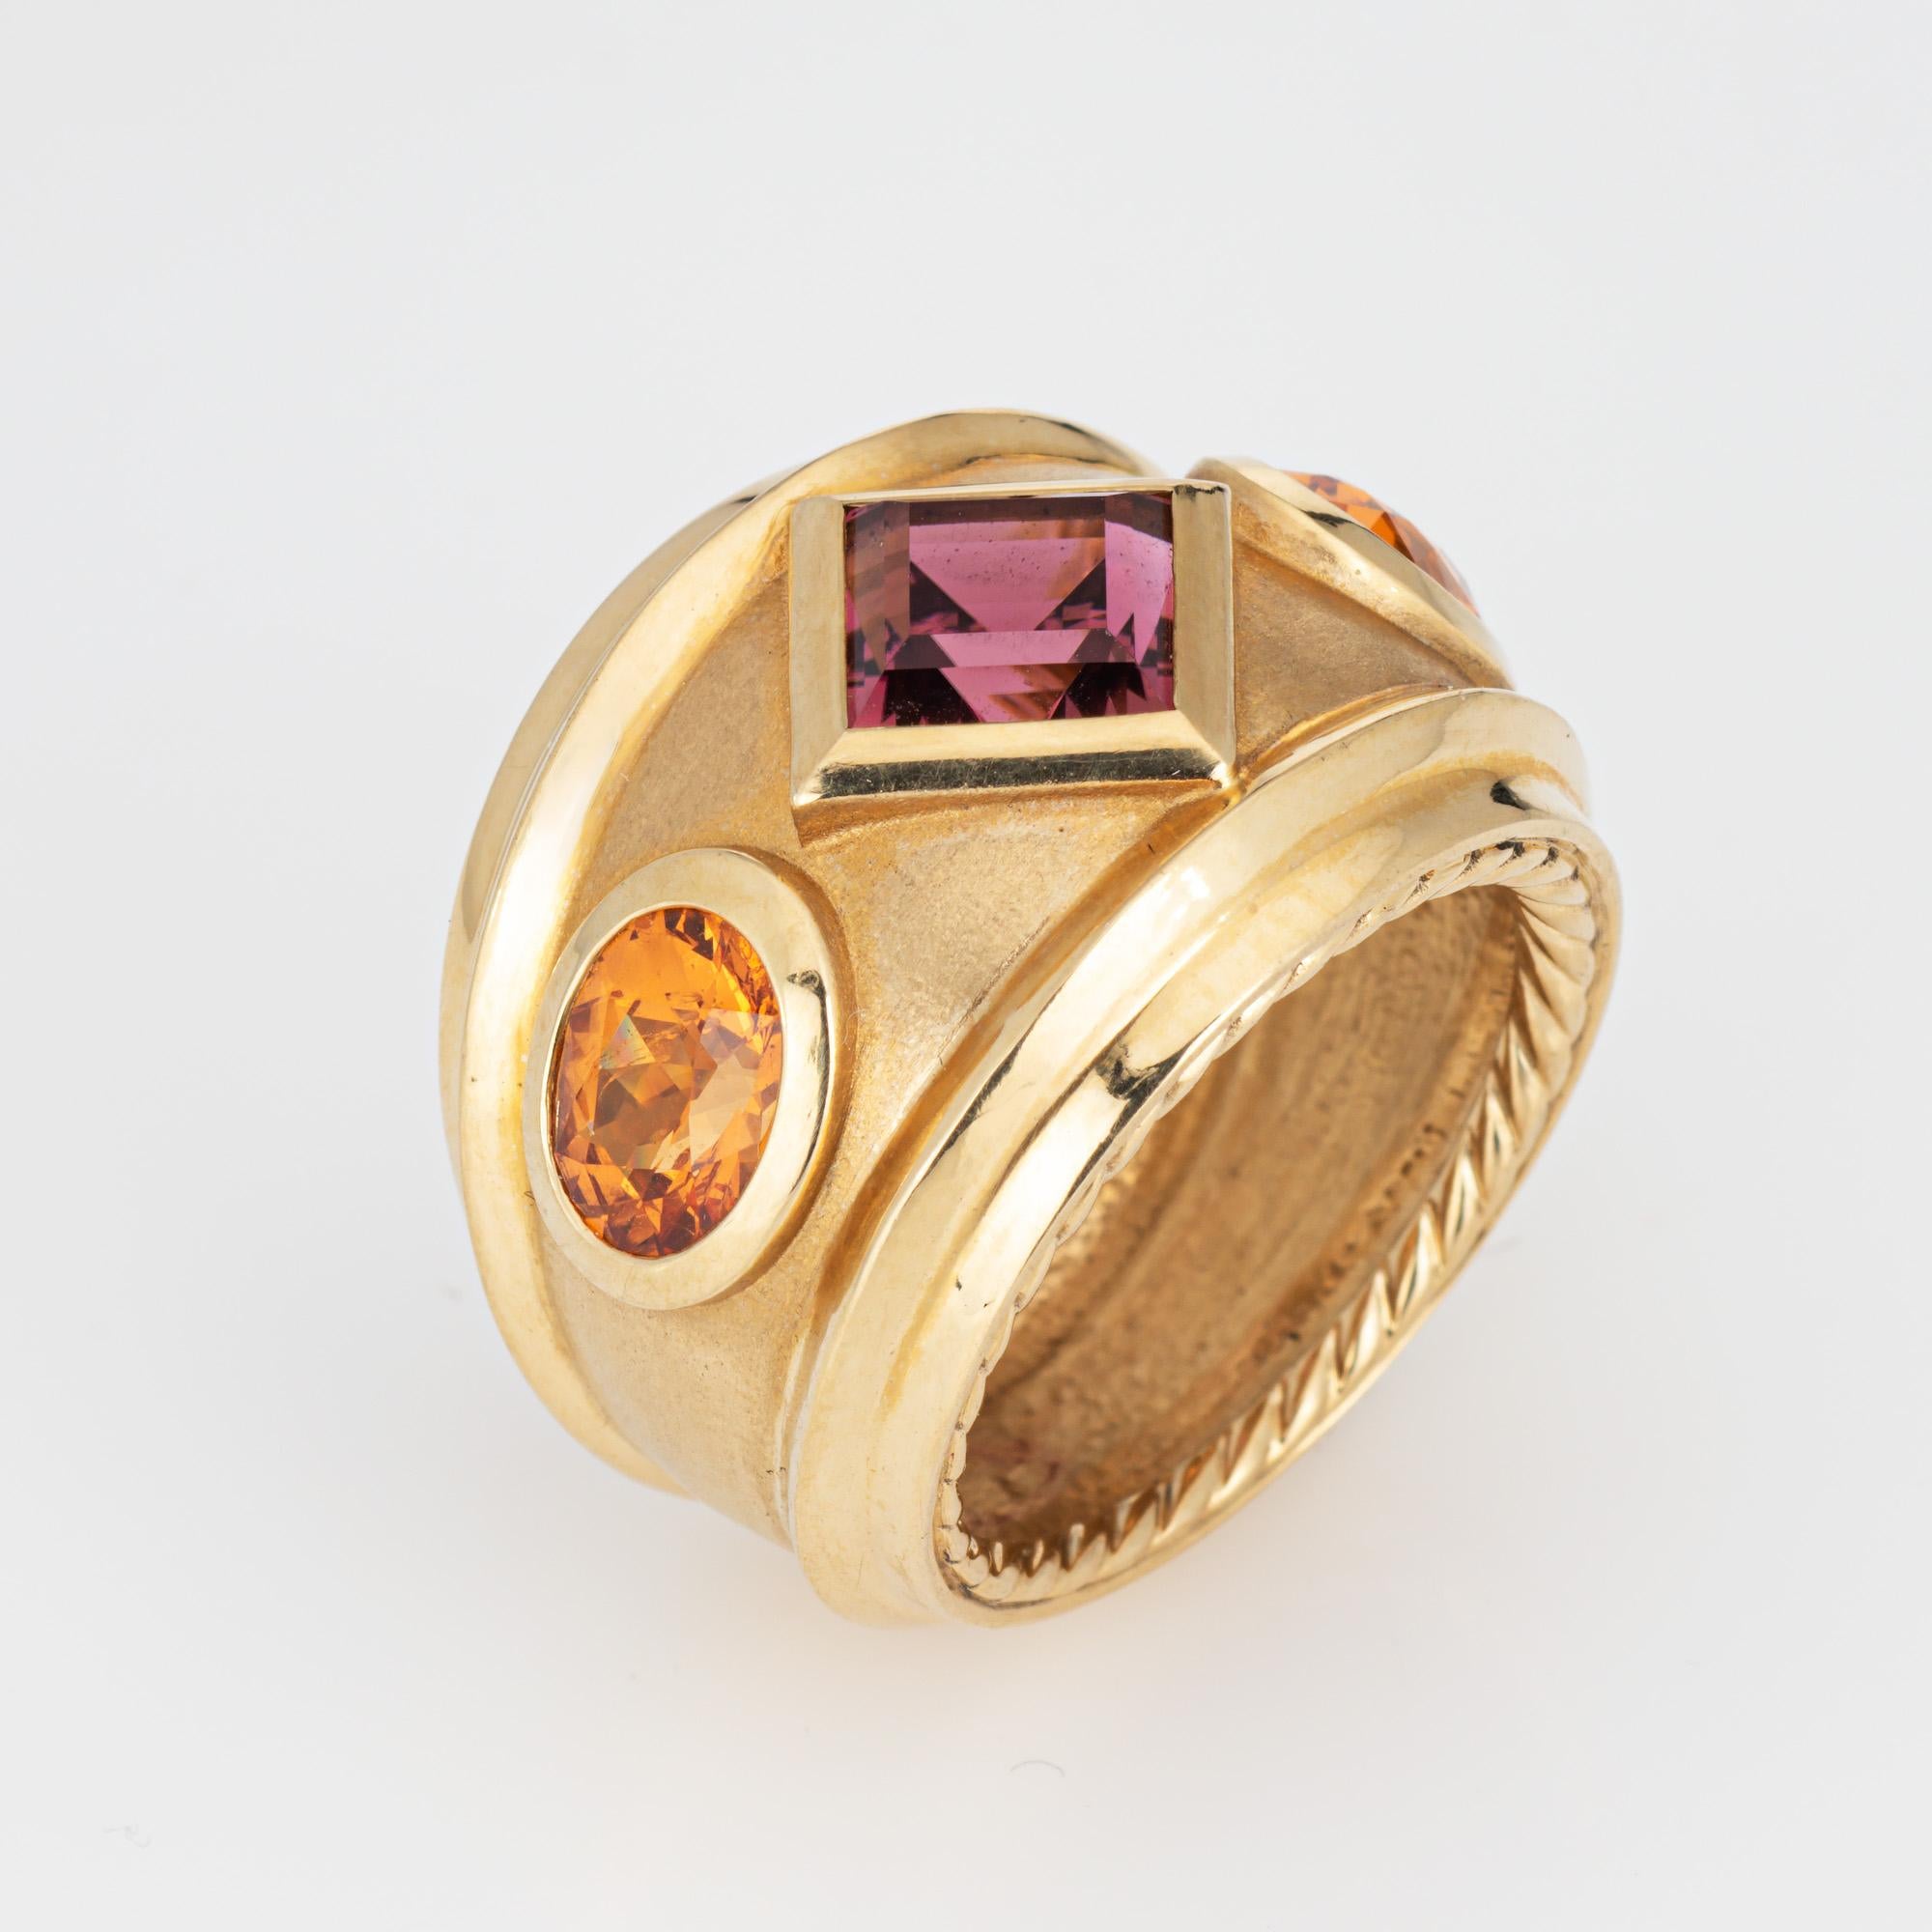 Estate David Yurman Renaissance ring crafted in 18 karat yellow.  

The out of production David Yurman ring is set with a center set Rhodolite garnet measuring 6mm. Two citrines measure 7mm x 5.5mm. The gemstones are in very good condition and free